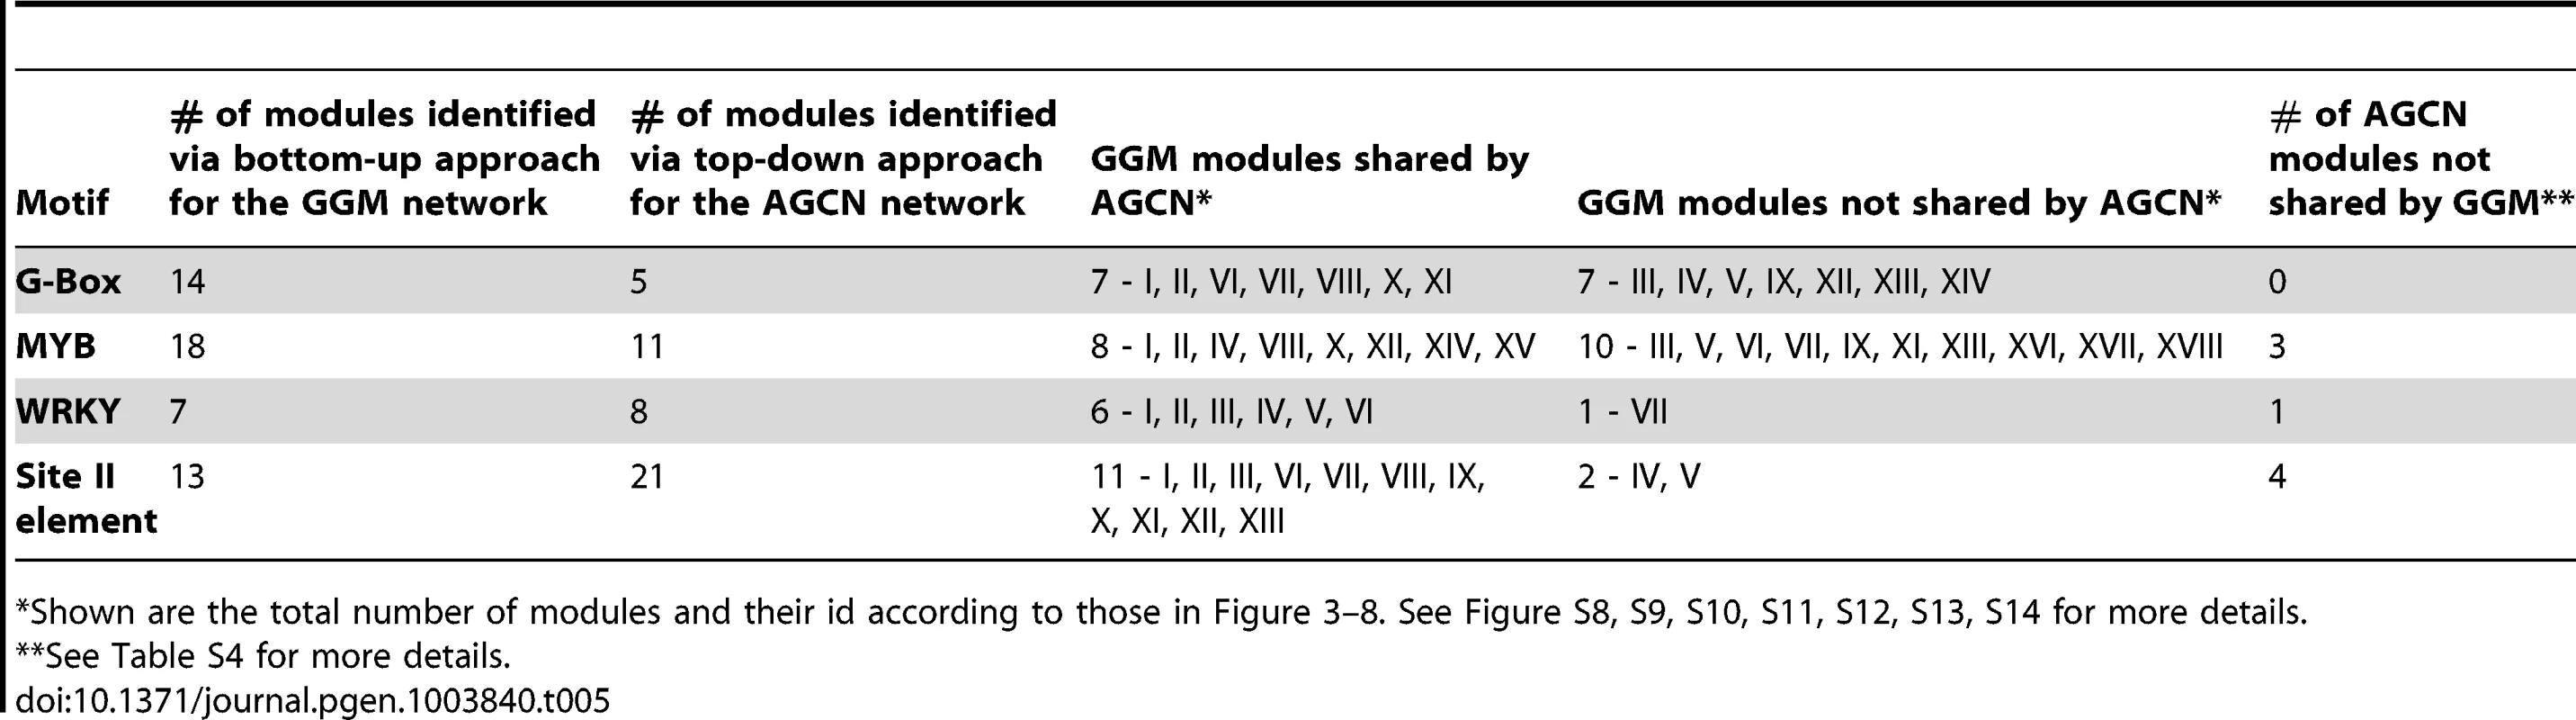 Comparison between the bottom-up approach (for GGM network) with the top-down approach (for AGCN network) on module discovery.